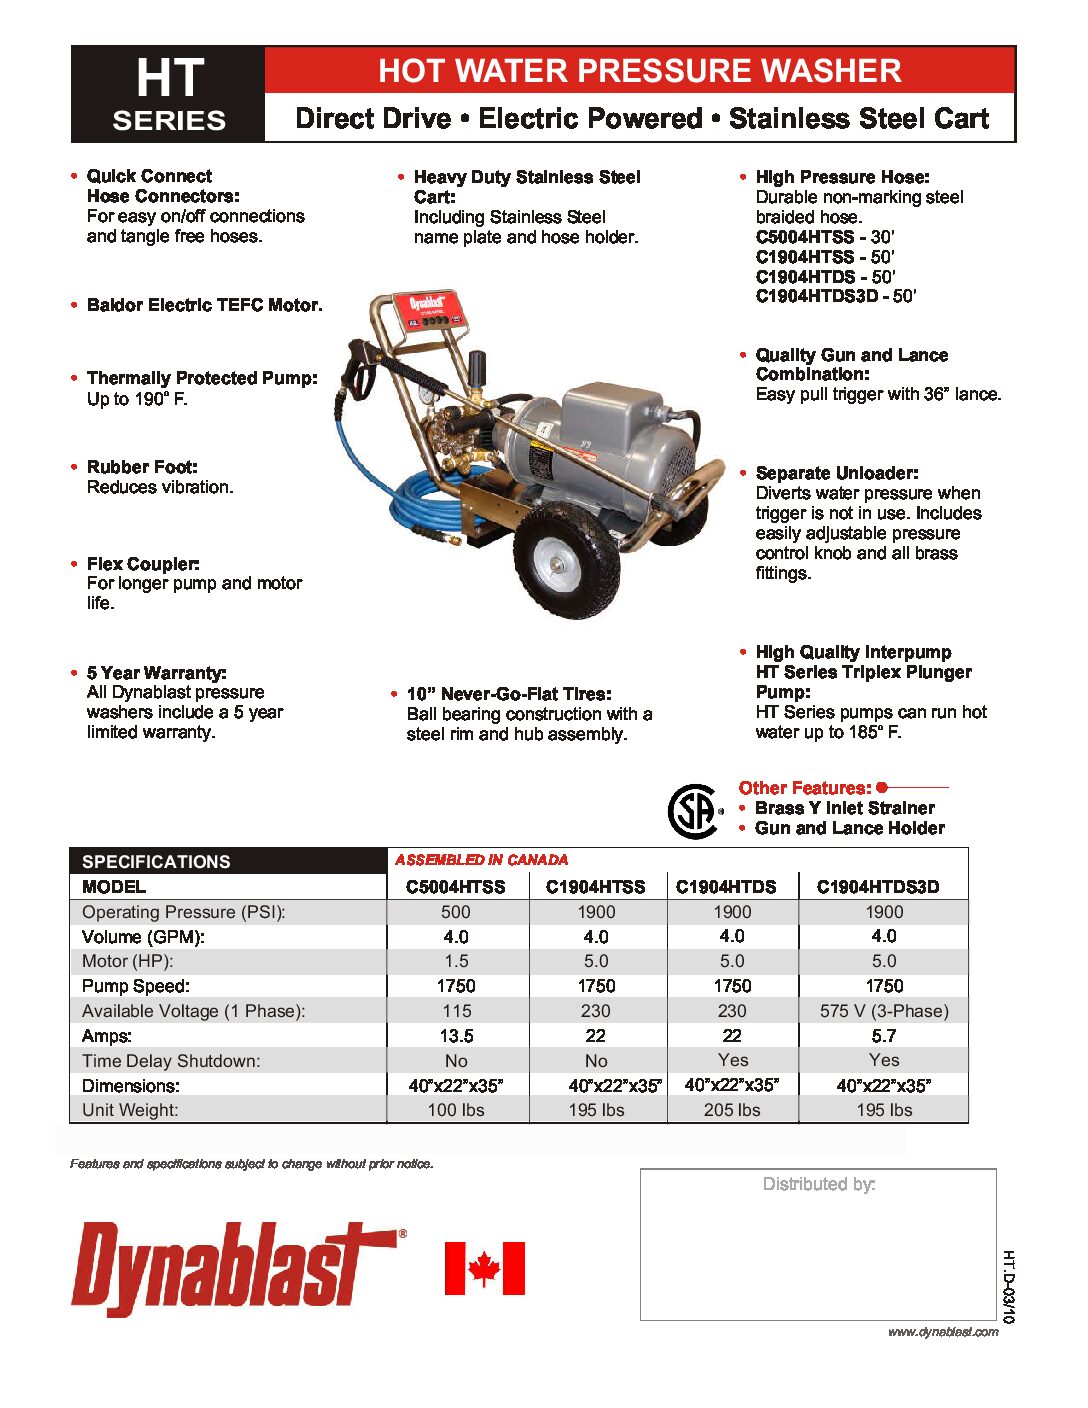 Dynablast C1904HTDS Cold & Hot Water Pressure Washer - English